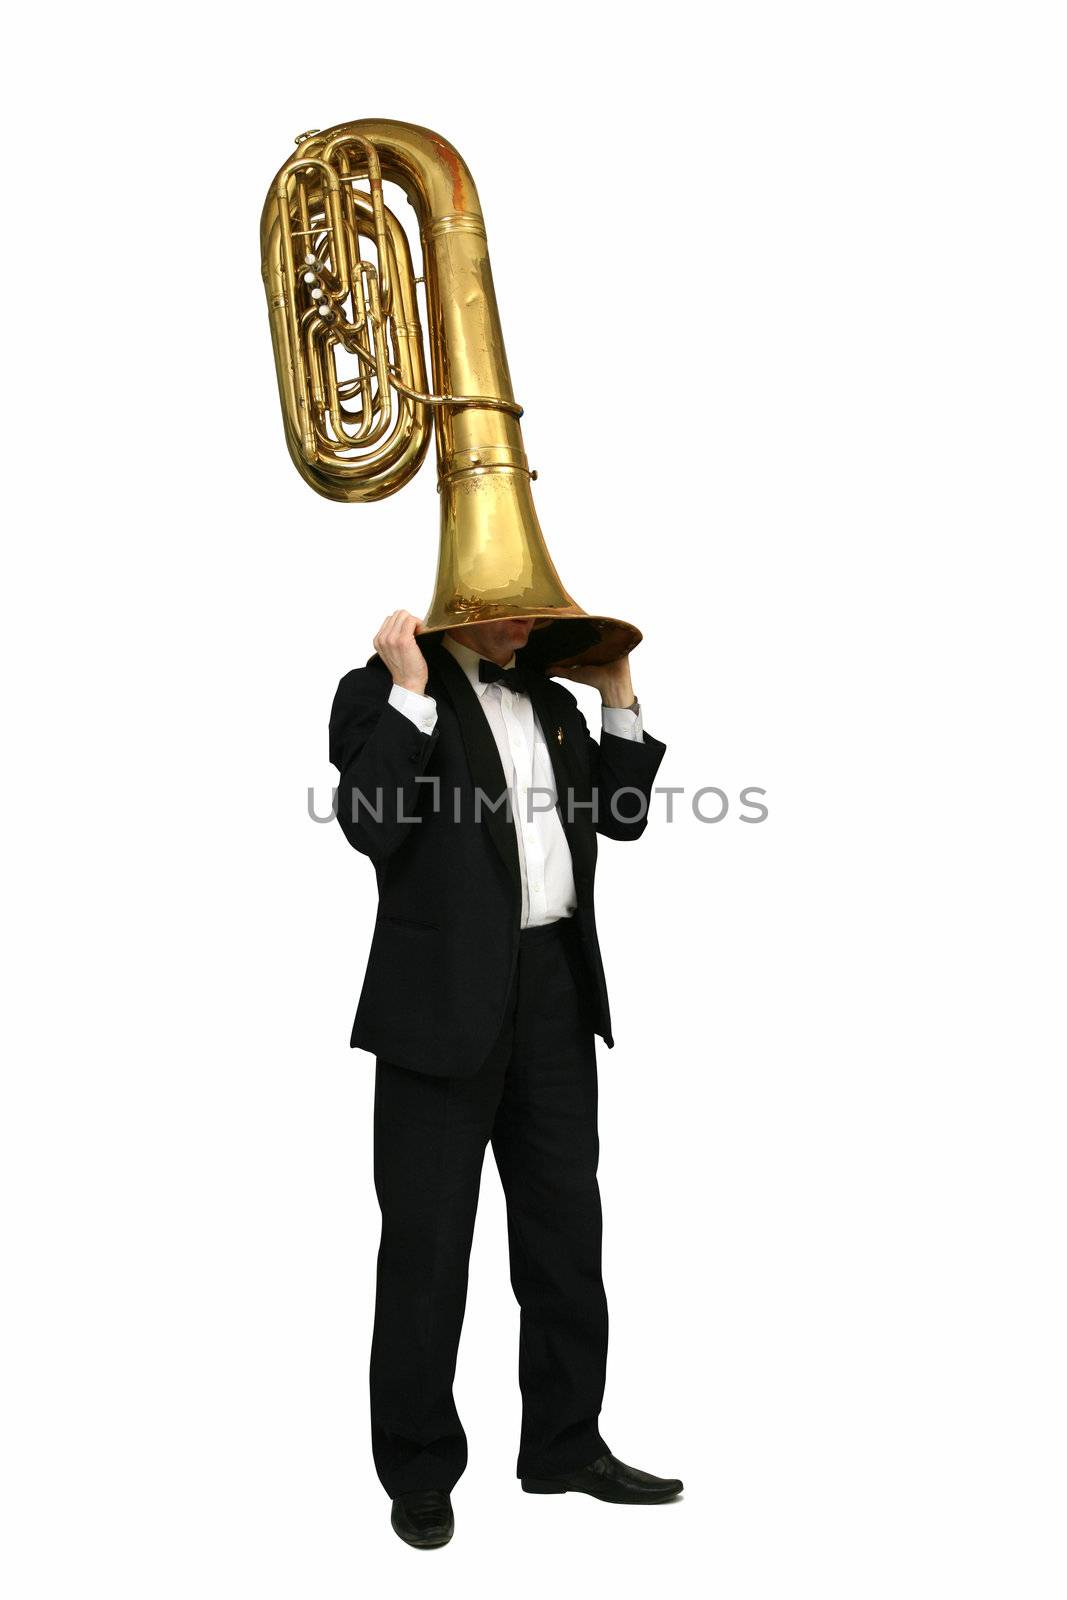 musician with a wind musical instrument tuba